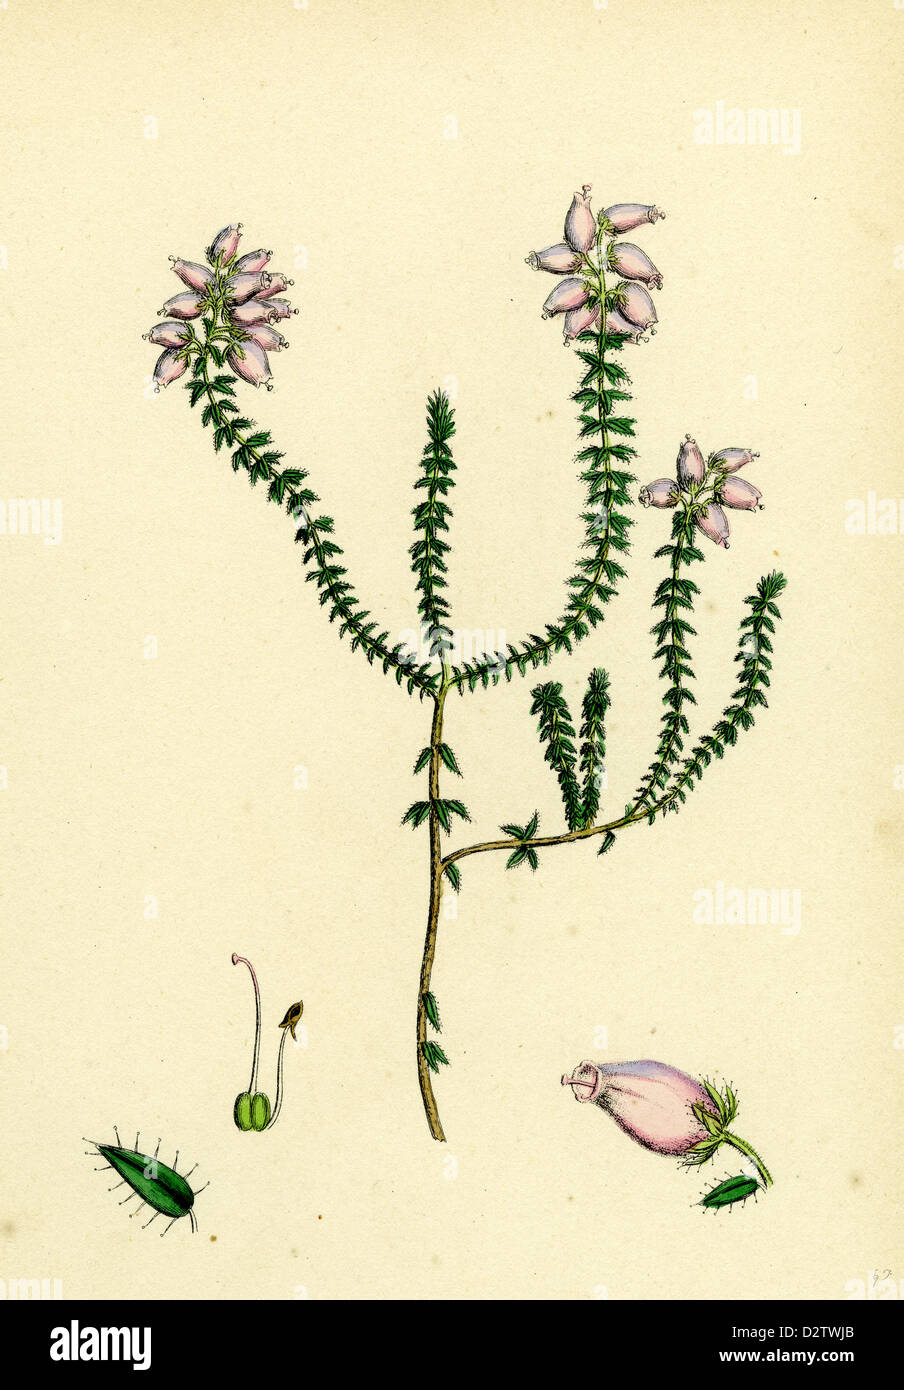 Erica Tetralici-ciliaris Hybrid between Fringed-leaved and Cross-leaved Heaths Stock Photo